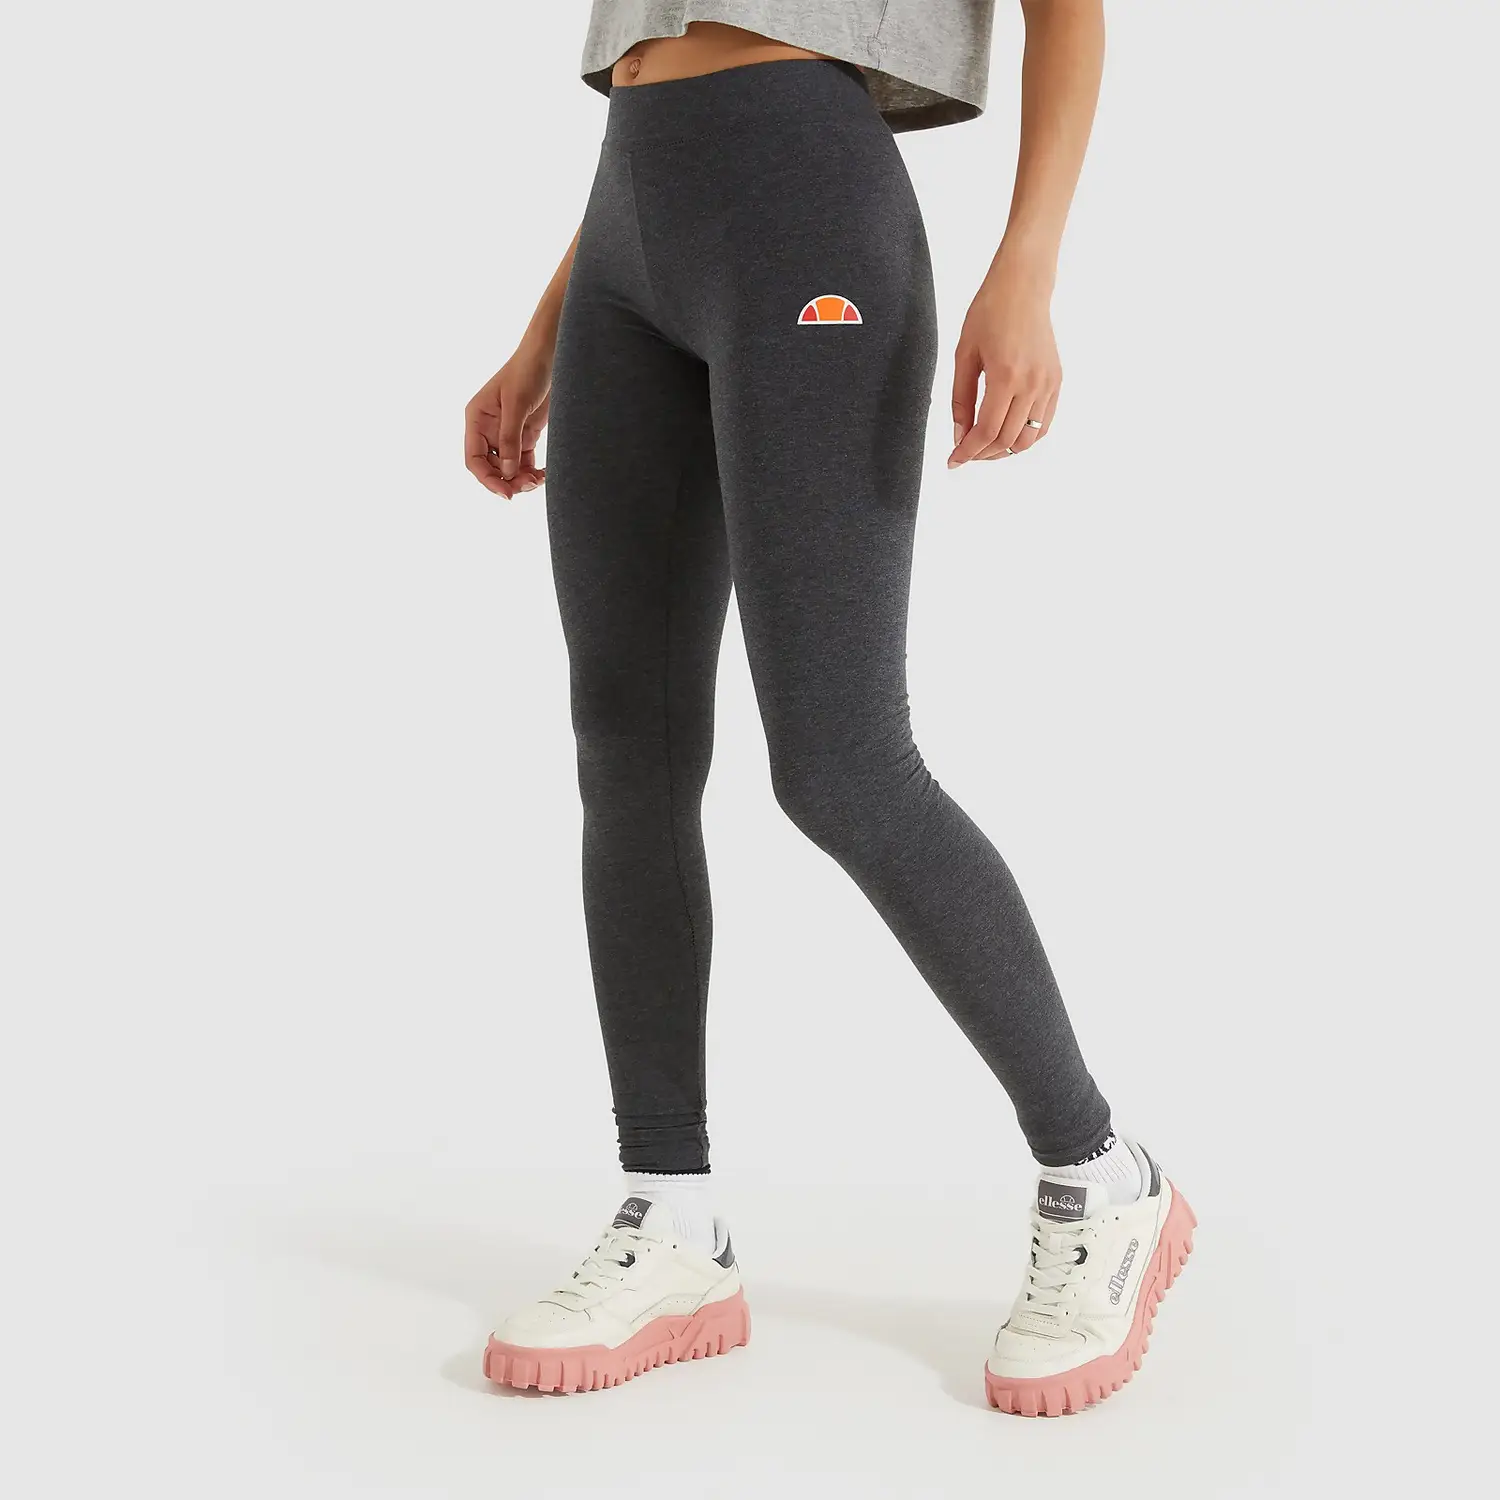 Women's Solos 2 Legging Grey Discounts and Cashback